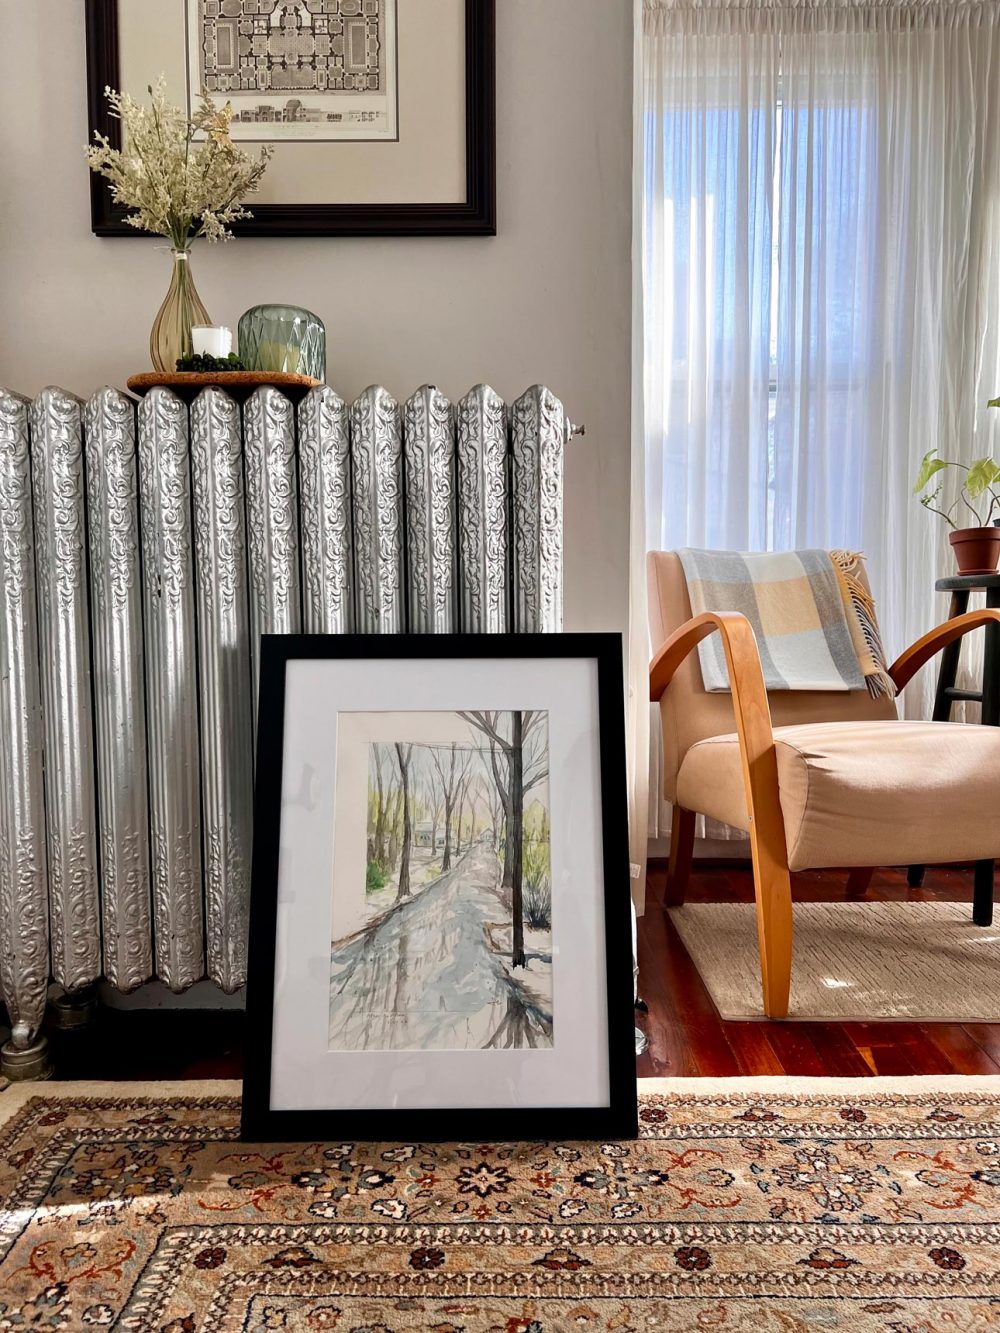 Watercolor landscape painting titled After the Storm by Samantha Eio in a black frame leaning against a silver radiator inside a cozy room